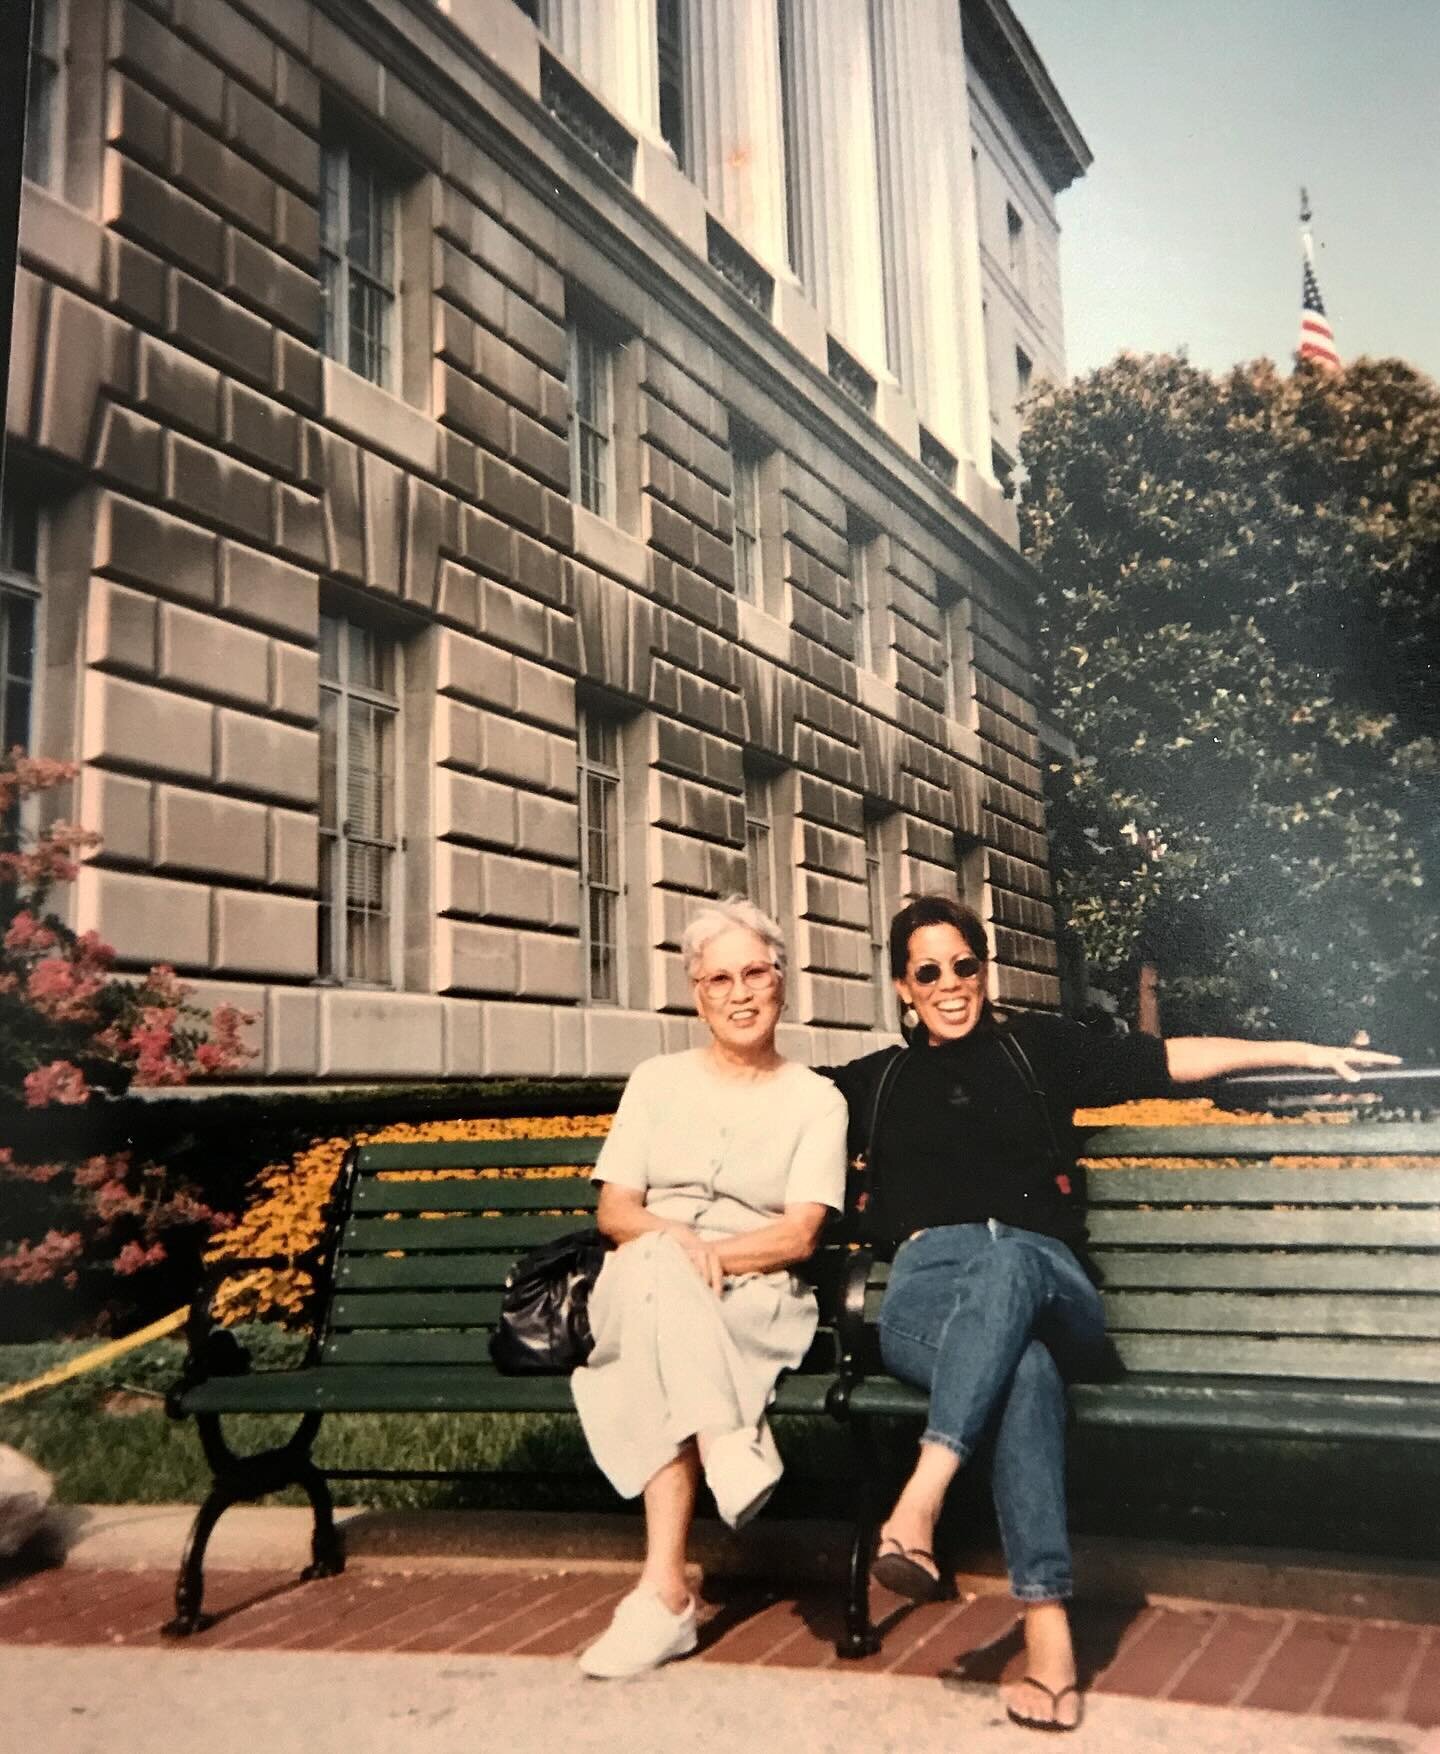 Throwback to the time my mom and I sat down in front of the IRS building in D.C., for no good reason. She passed away twelve days ago and I miss her now, for every reason.

#clarauechi #rip #tbt #mymother #motherdaughter #family